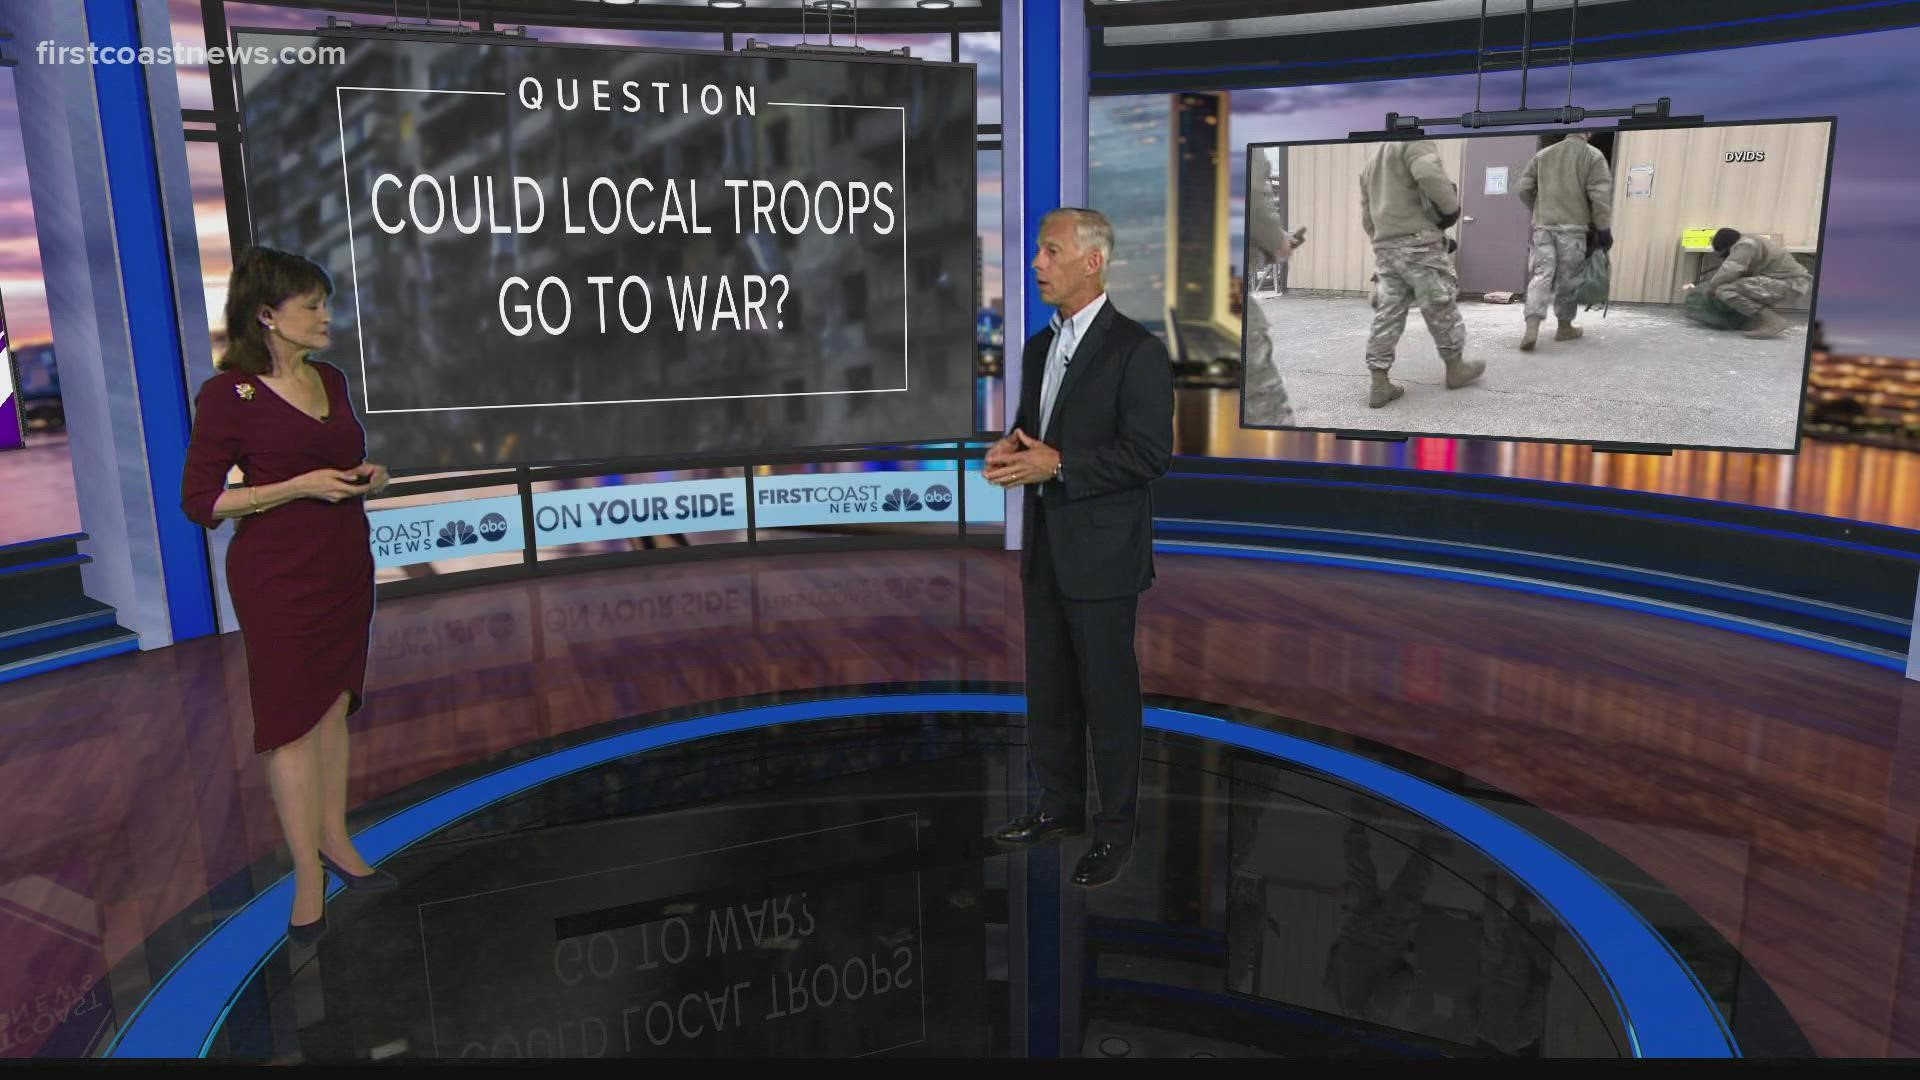 We have a strong military community carefully watching the war in Ukraine. First Coast News is speaking with an expert to help us analyze what's happening there.